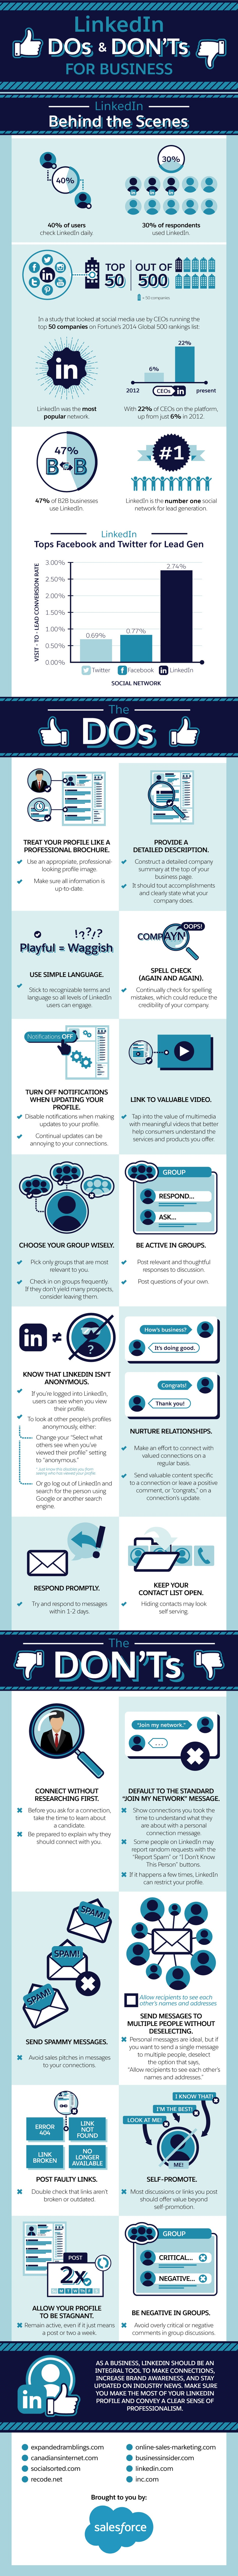 LinkedIn Business Dos and Don'ts Infographic